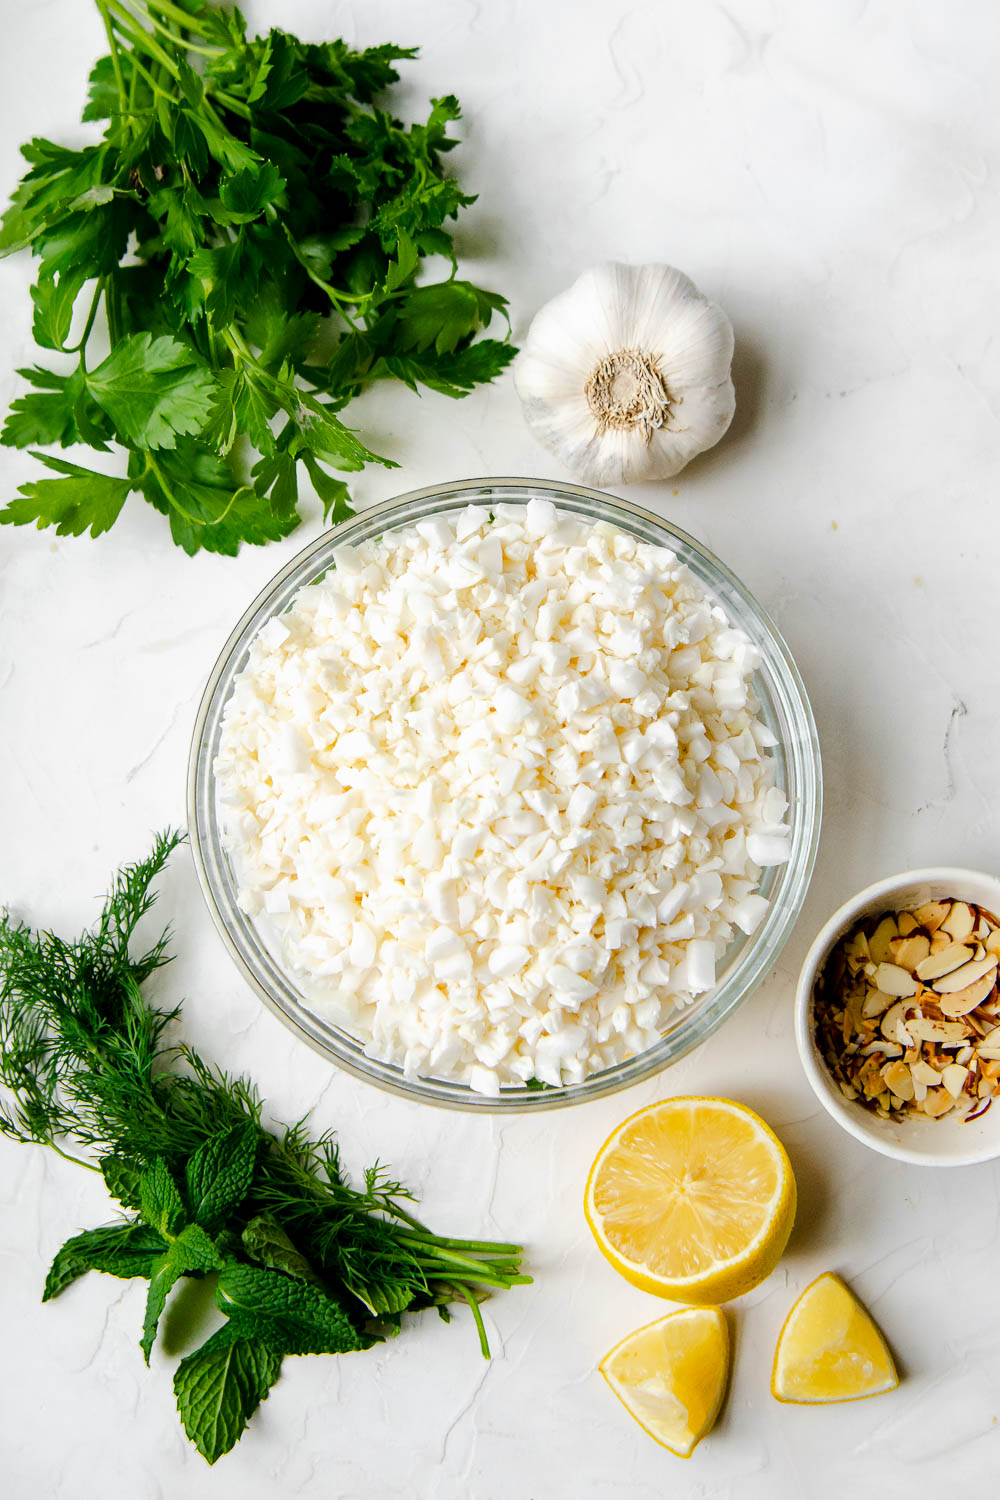 Ingredients for herbed cauliflower rice pilaf including lemons, dills, mint, parsley and toasted almonds.